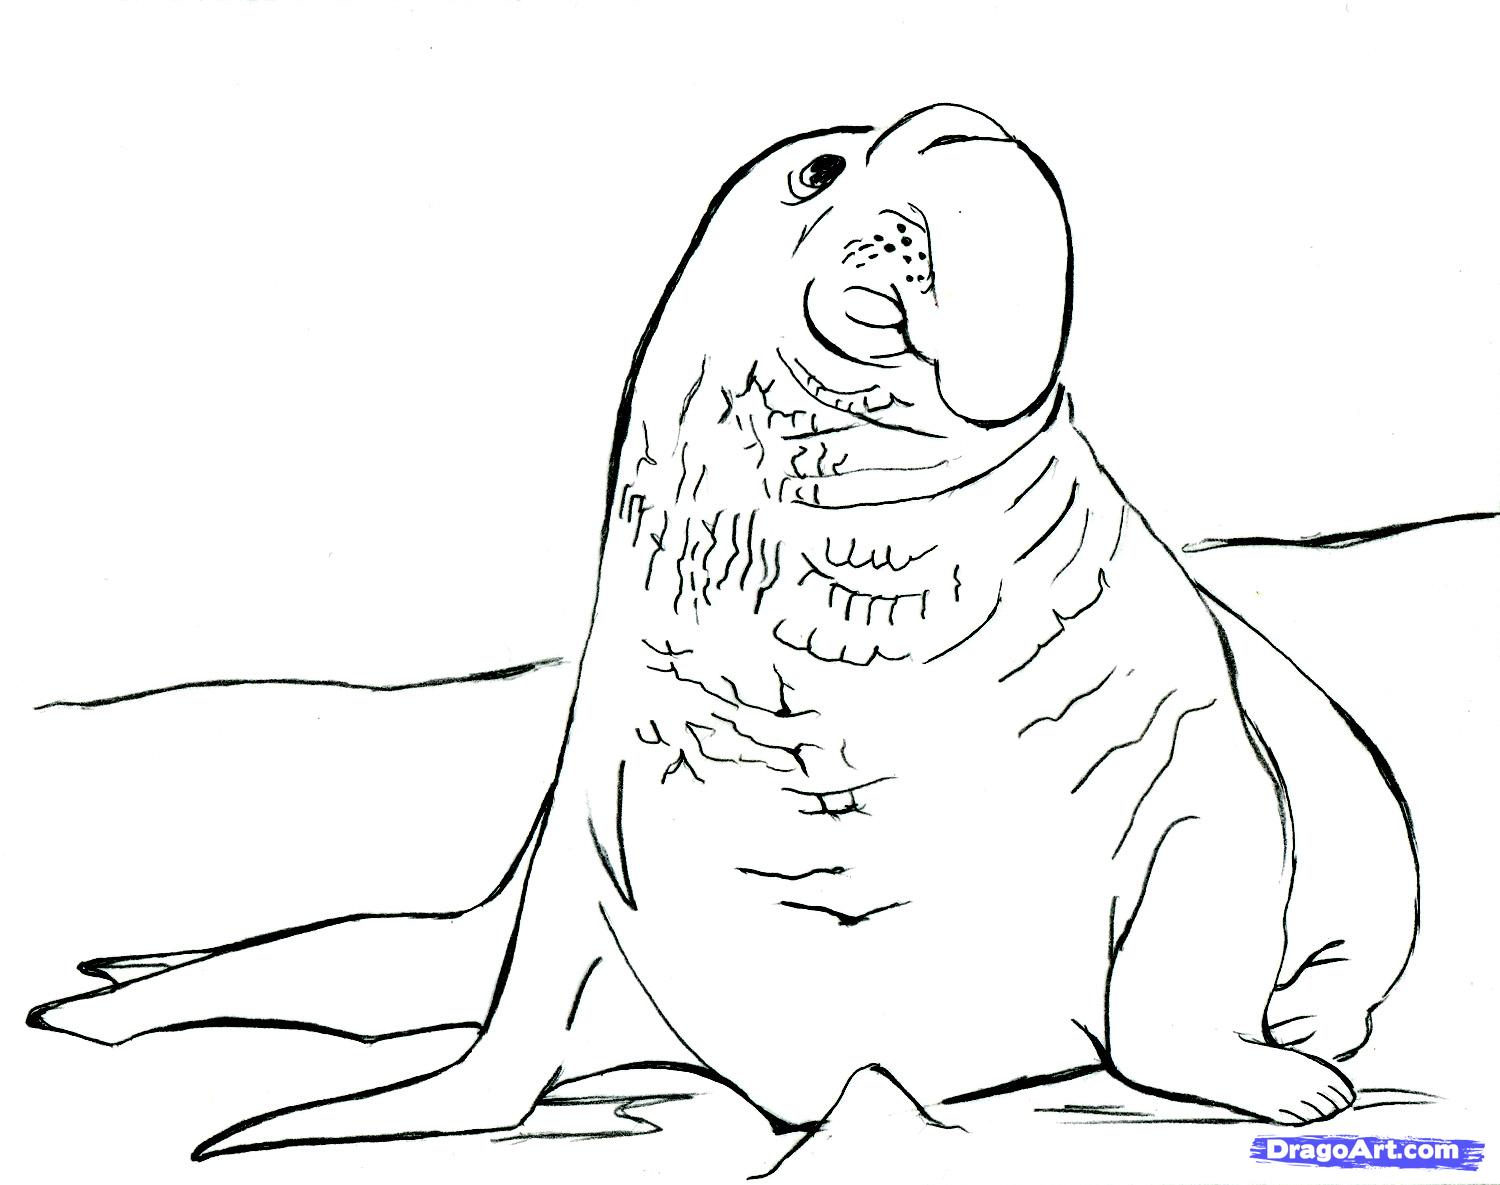 Leopard Seal coloring #14, Download drawings